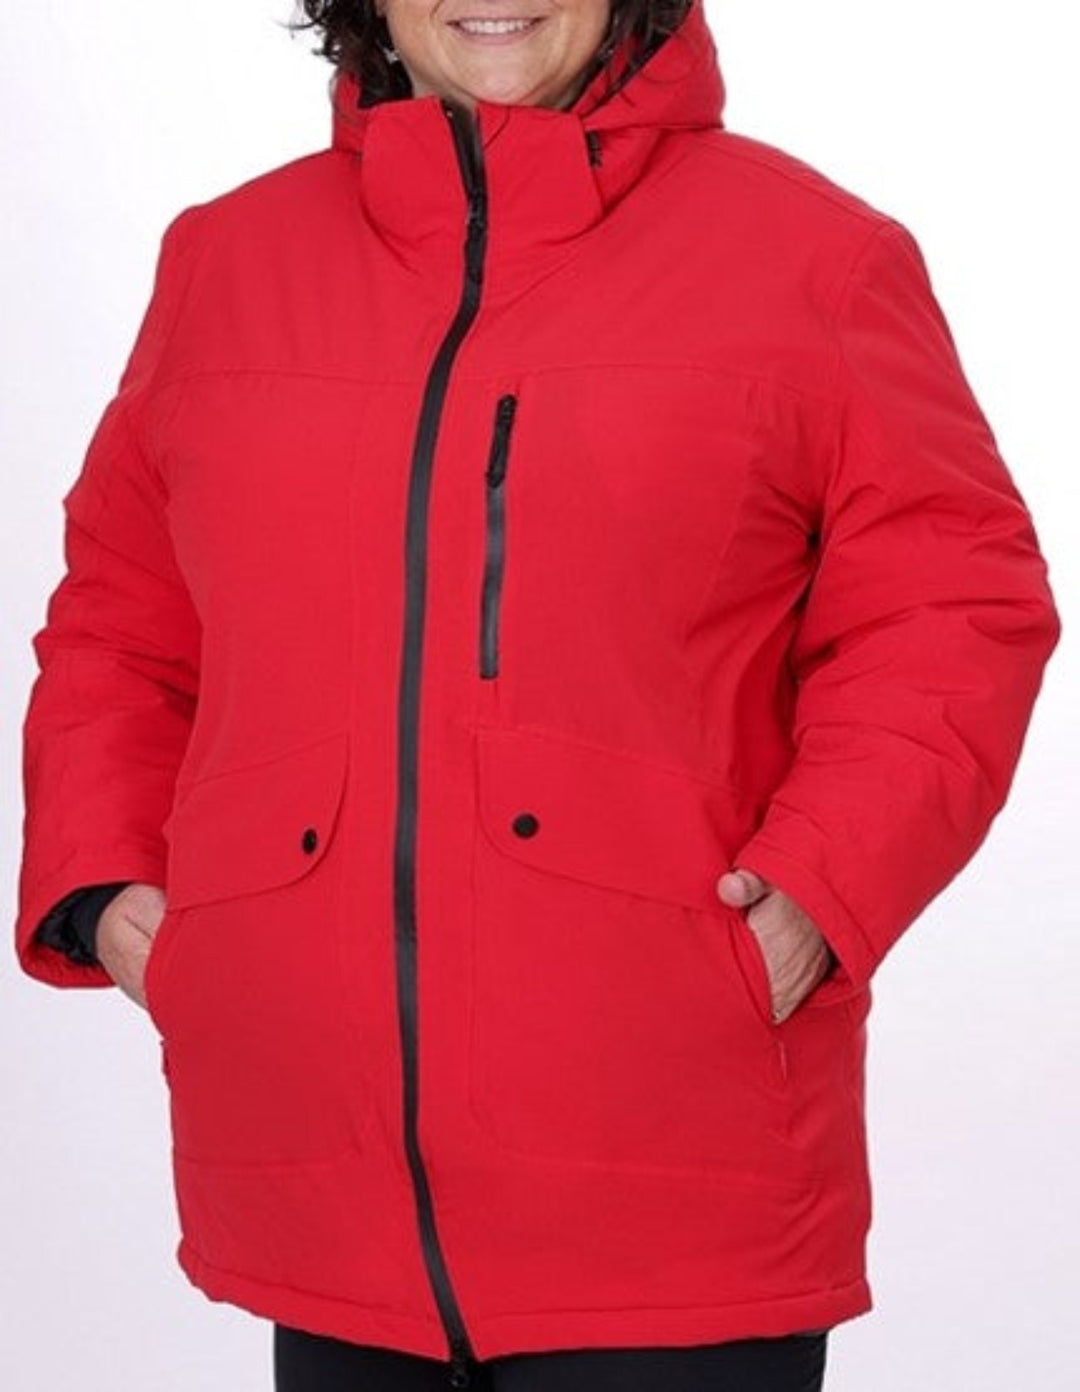 Plus Size Turin Insulated Jacket by Sportive Plus*